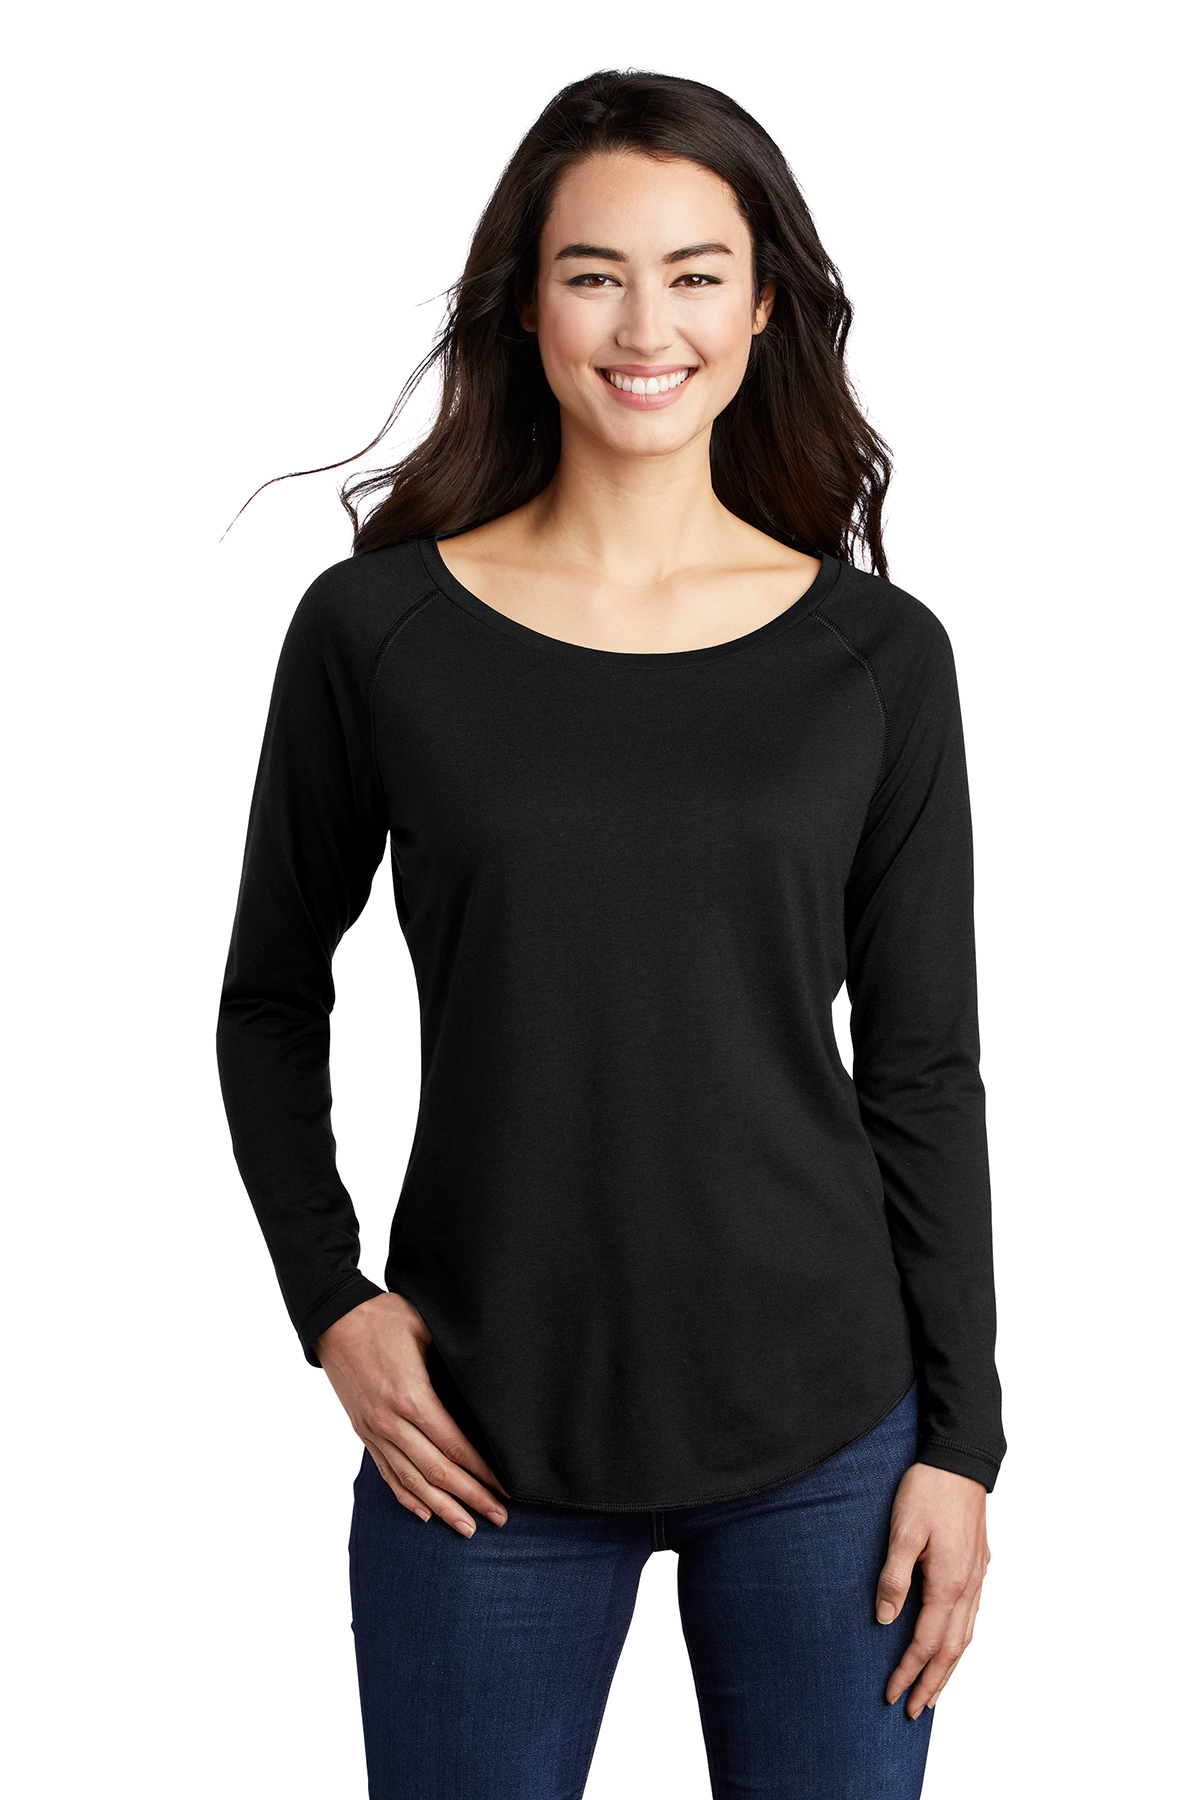 Enamor Athleisure Women's Polyester Relaxed Fit Long Length Raglan Sleeves  Scoop Neck Quick Dry 4 Way Stretch Antimicrobial Graphic Tee -  E163(E163-Jet Black W/ Gratitude-XL)